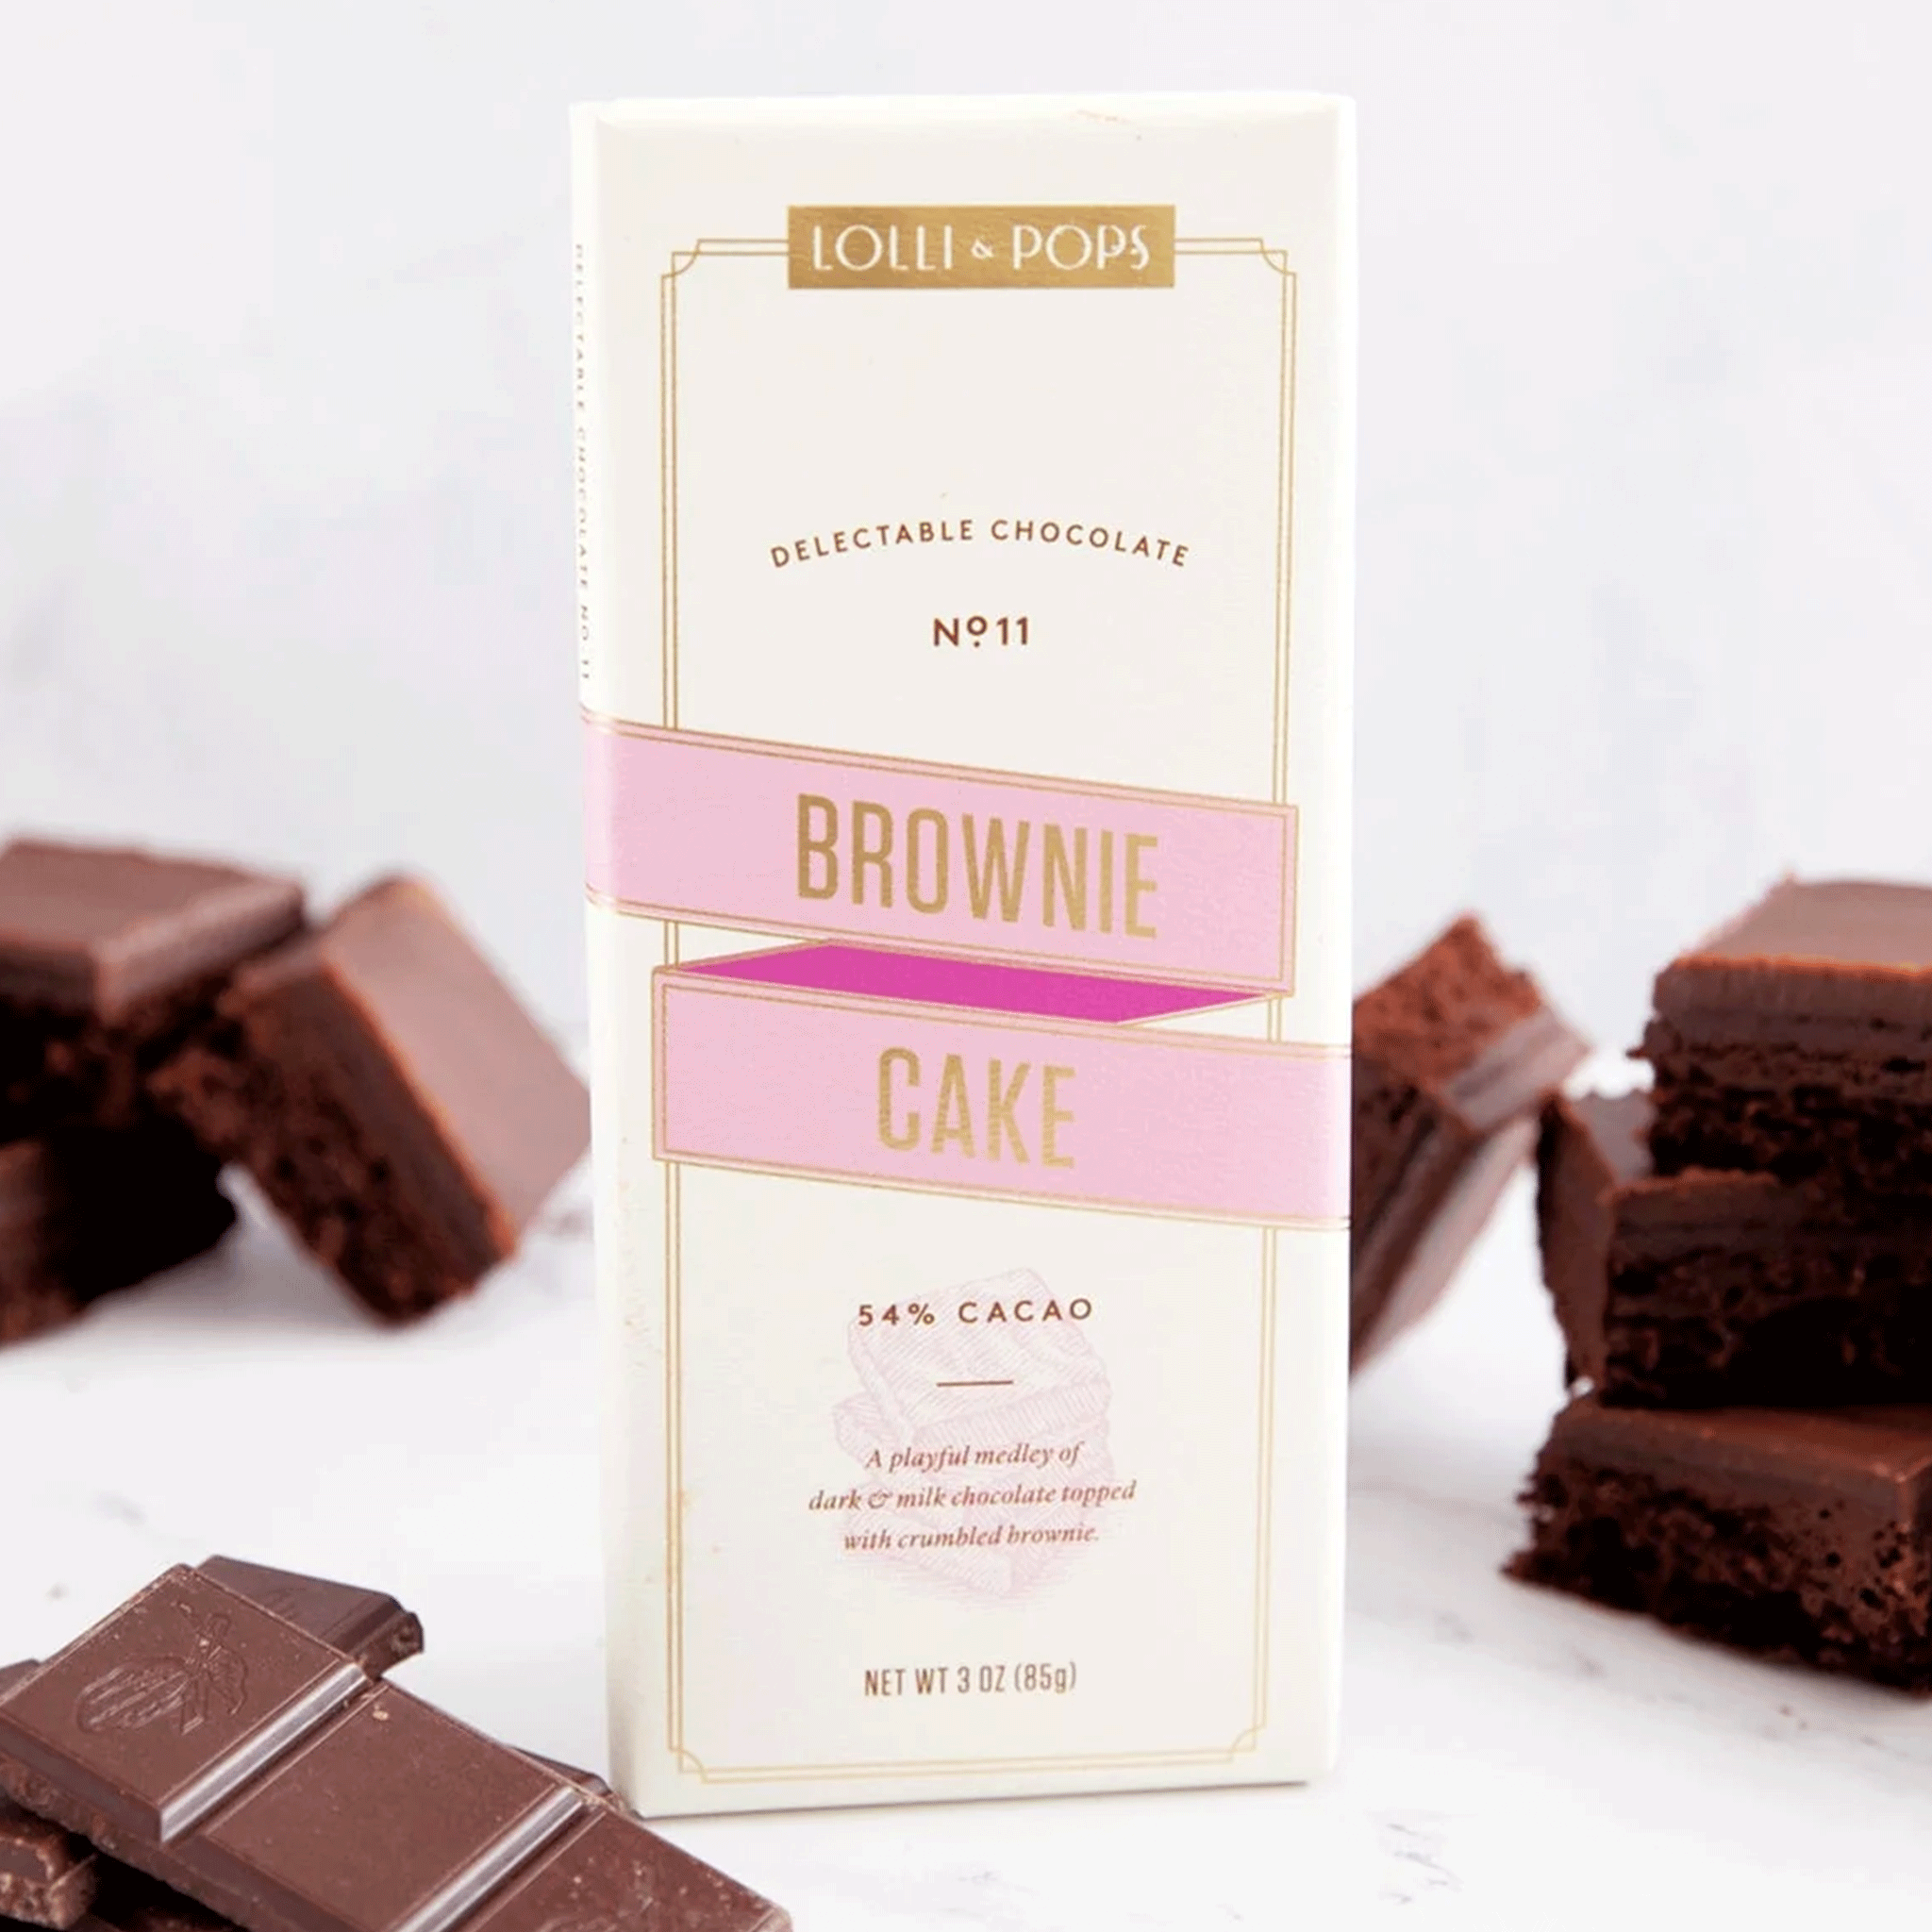 On a white background surrounded by chocolate and brownies is a neutral package filled with a chocolate bar and text on the front that reads, "Lolli & Pops Brownie Cake". 